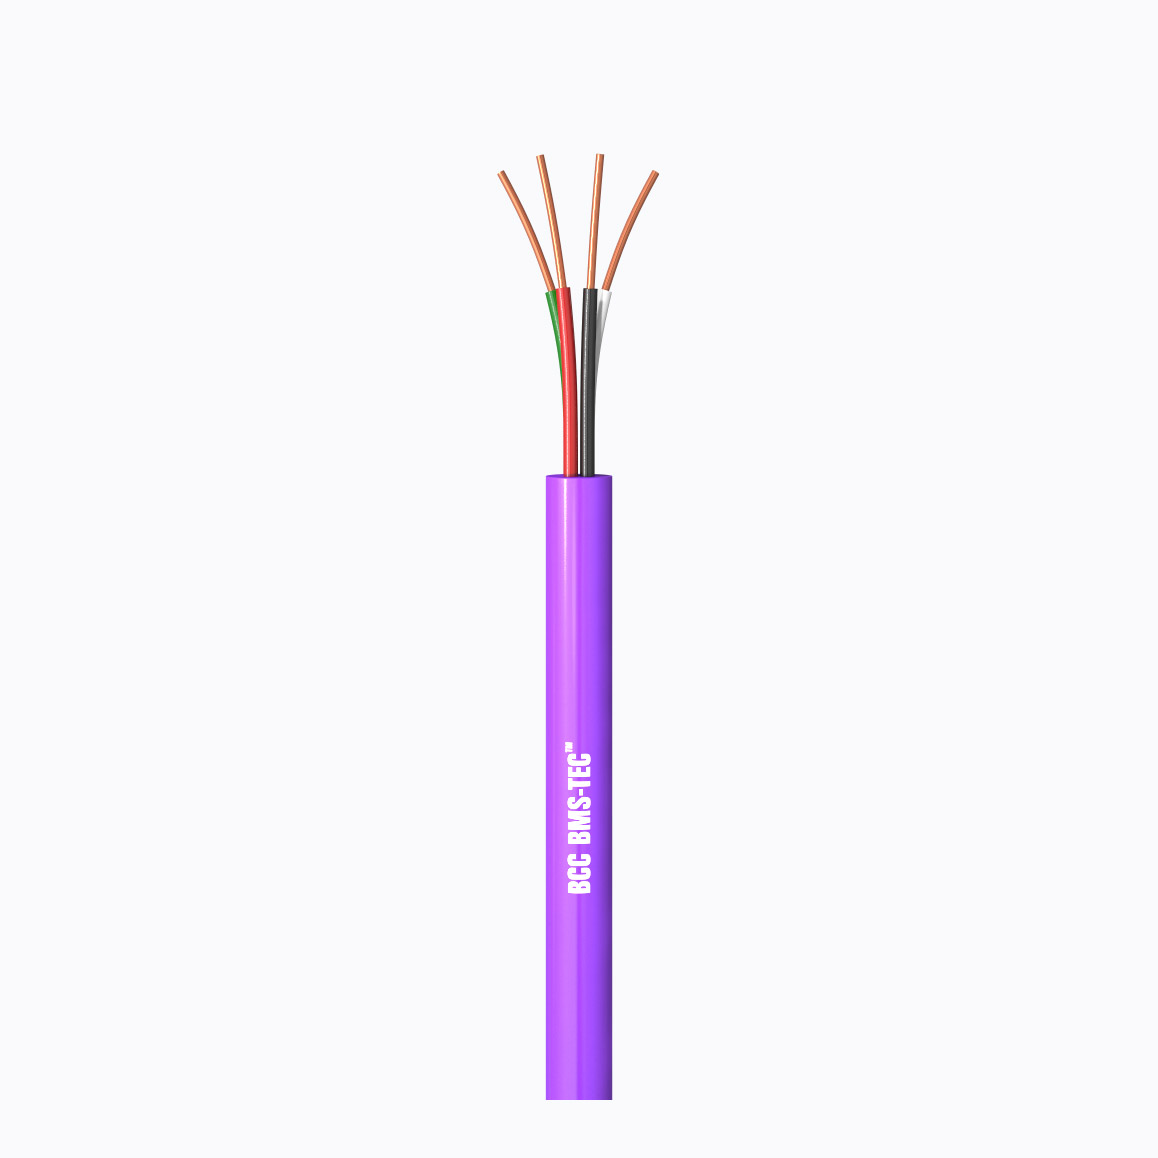 20 AWG LSZH Un-Screened Multi-Conductor Cable